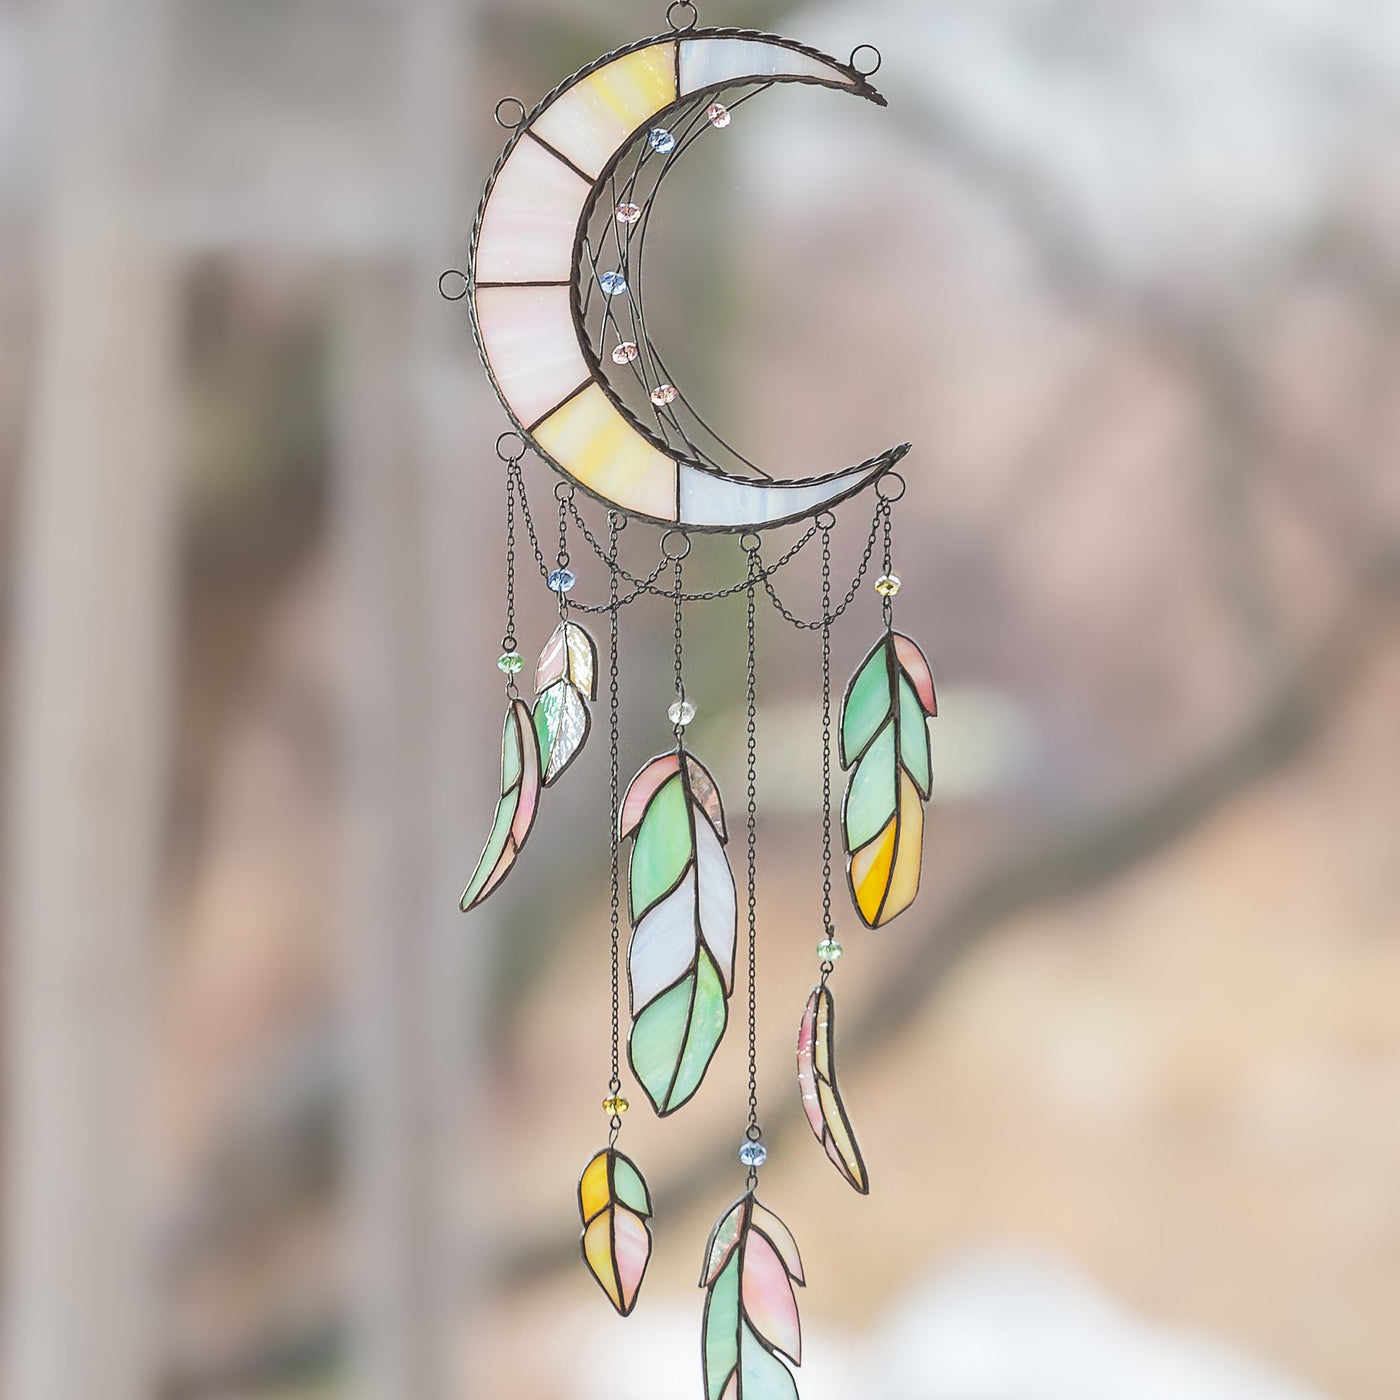 Stained glass moon-shaped dreamcatcher with colourful feathers